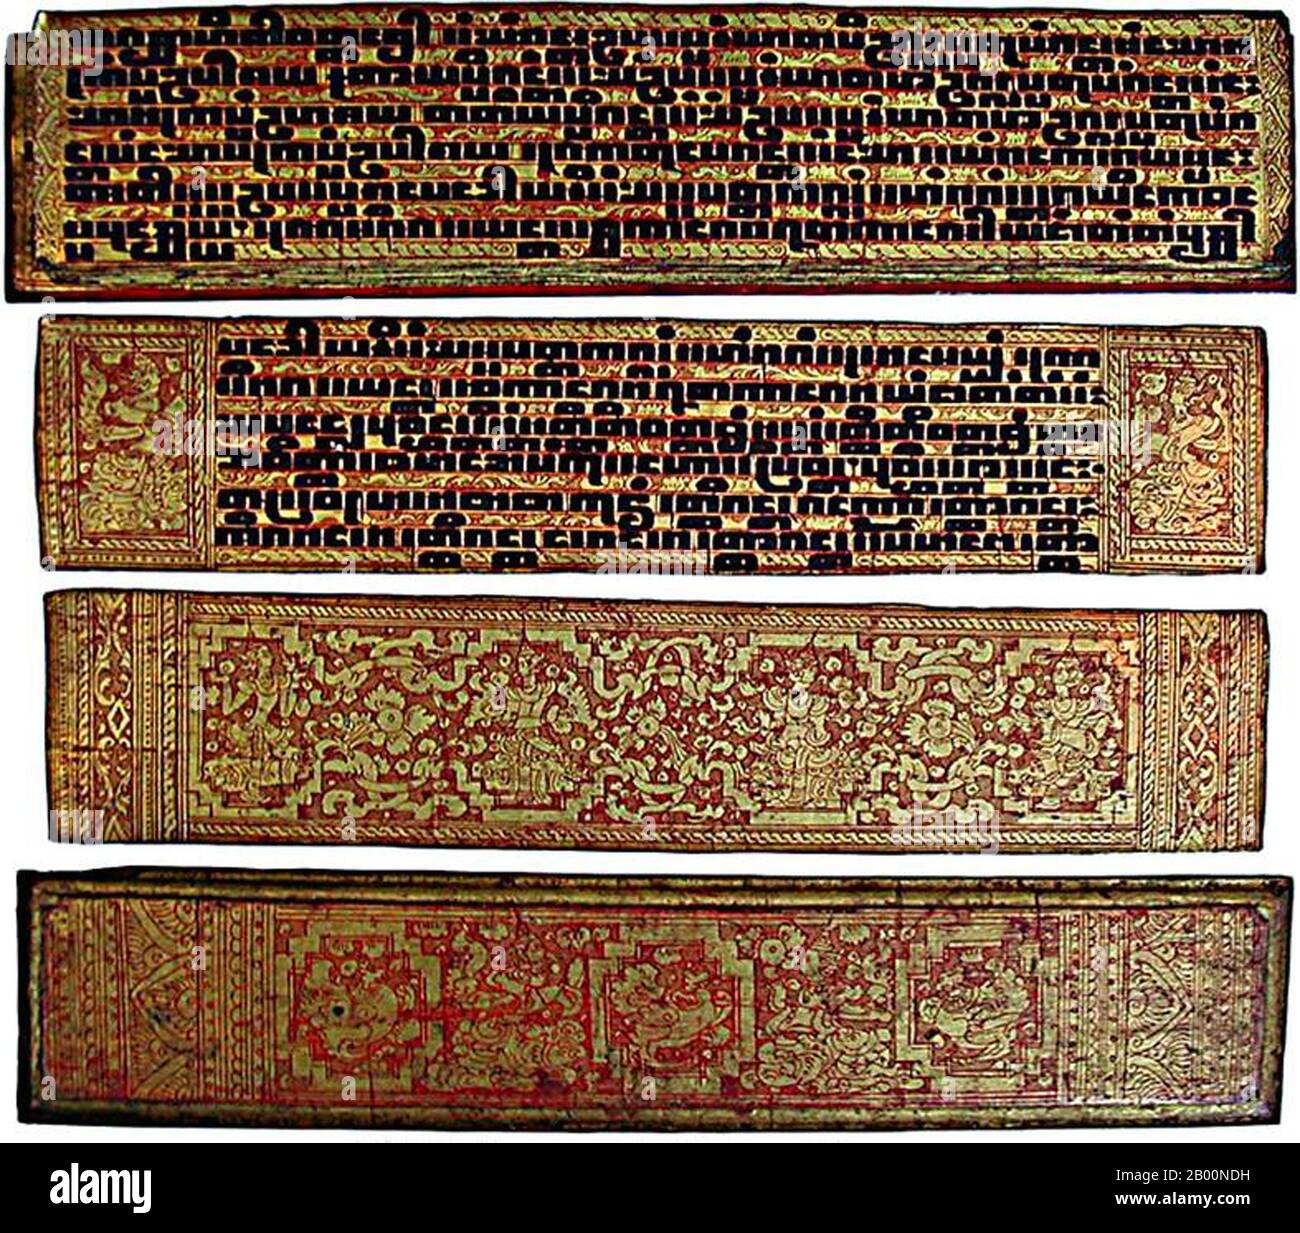 Myanmar / Burma: Pali script. Kammavaca in Pali, Burma, 19th century. Pali  (also Pāḷi) is a Middle Indo-Aryan language that is in the Prakrit language  group and was indigenous to the Indian